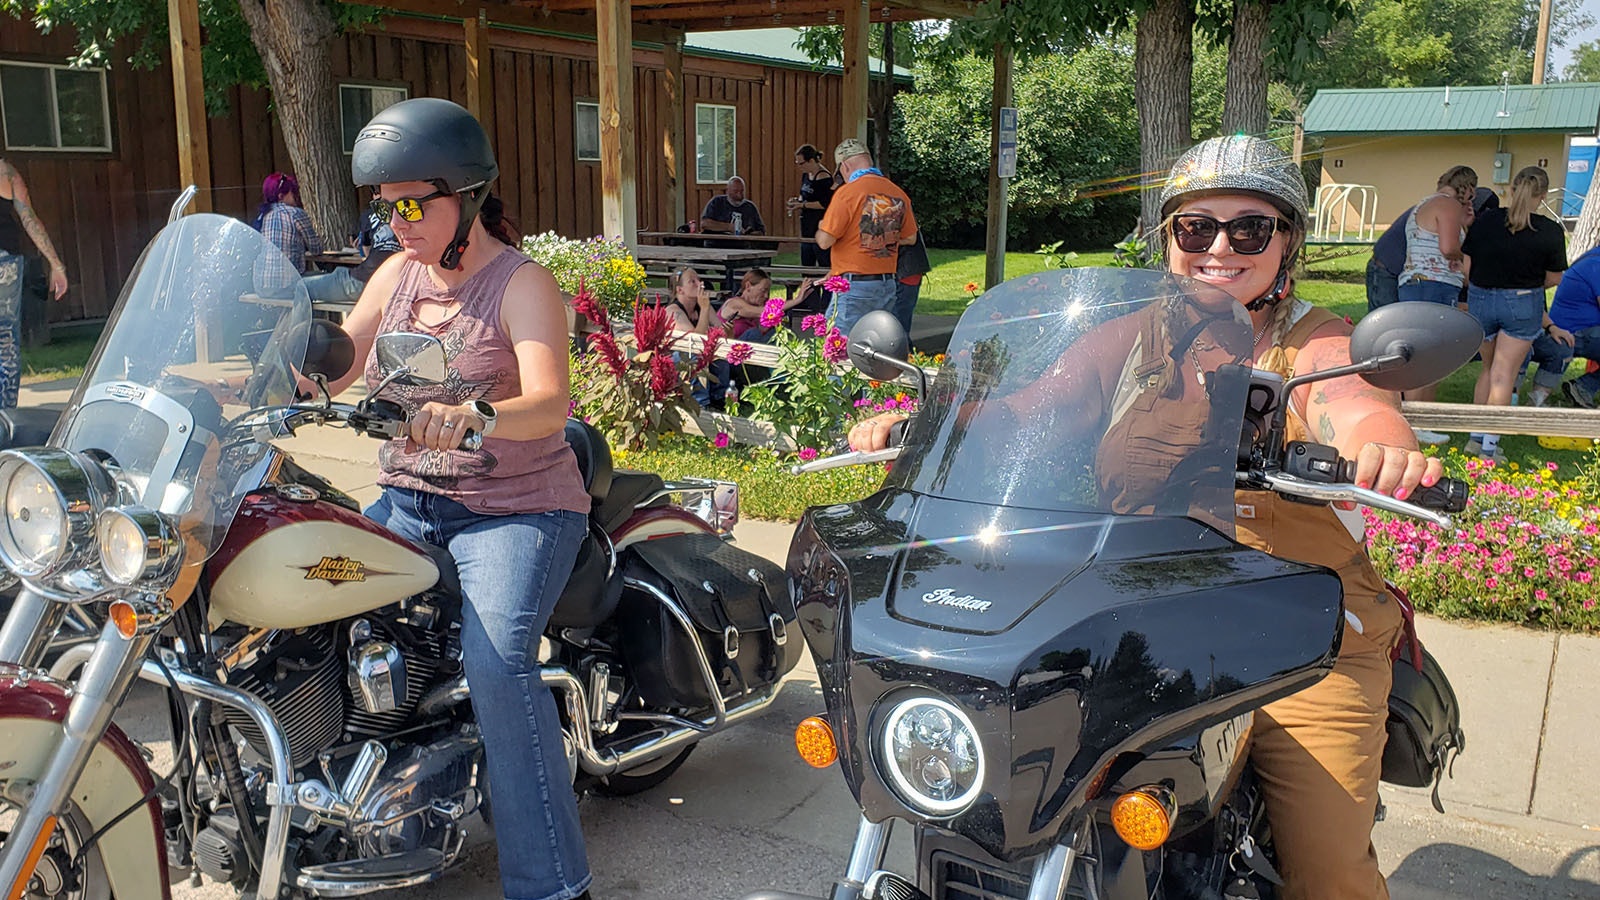 Erika Green Labor, left, and Kady Dubrock get ready to head for Devils Tower after visiting the Ham-N-Jam.